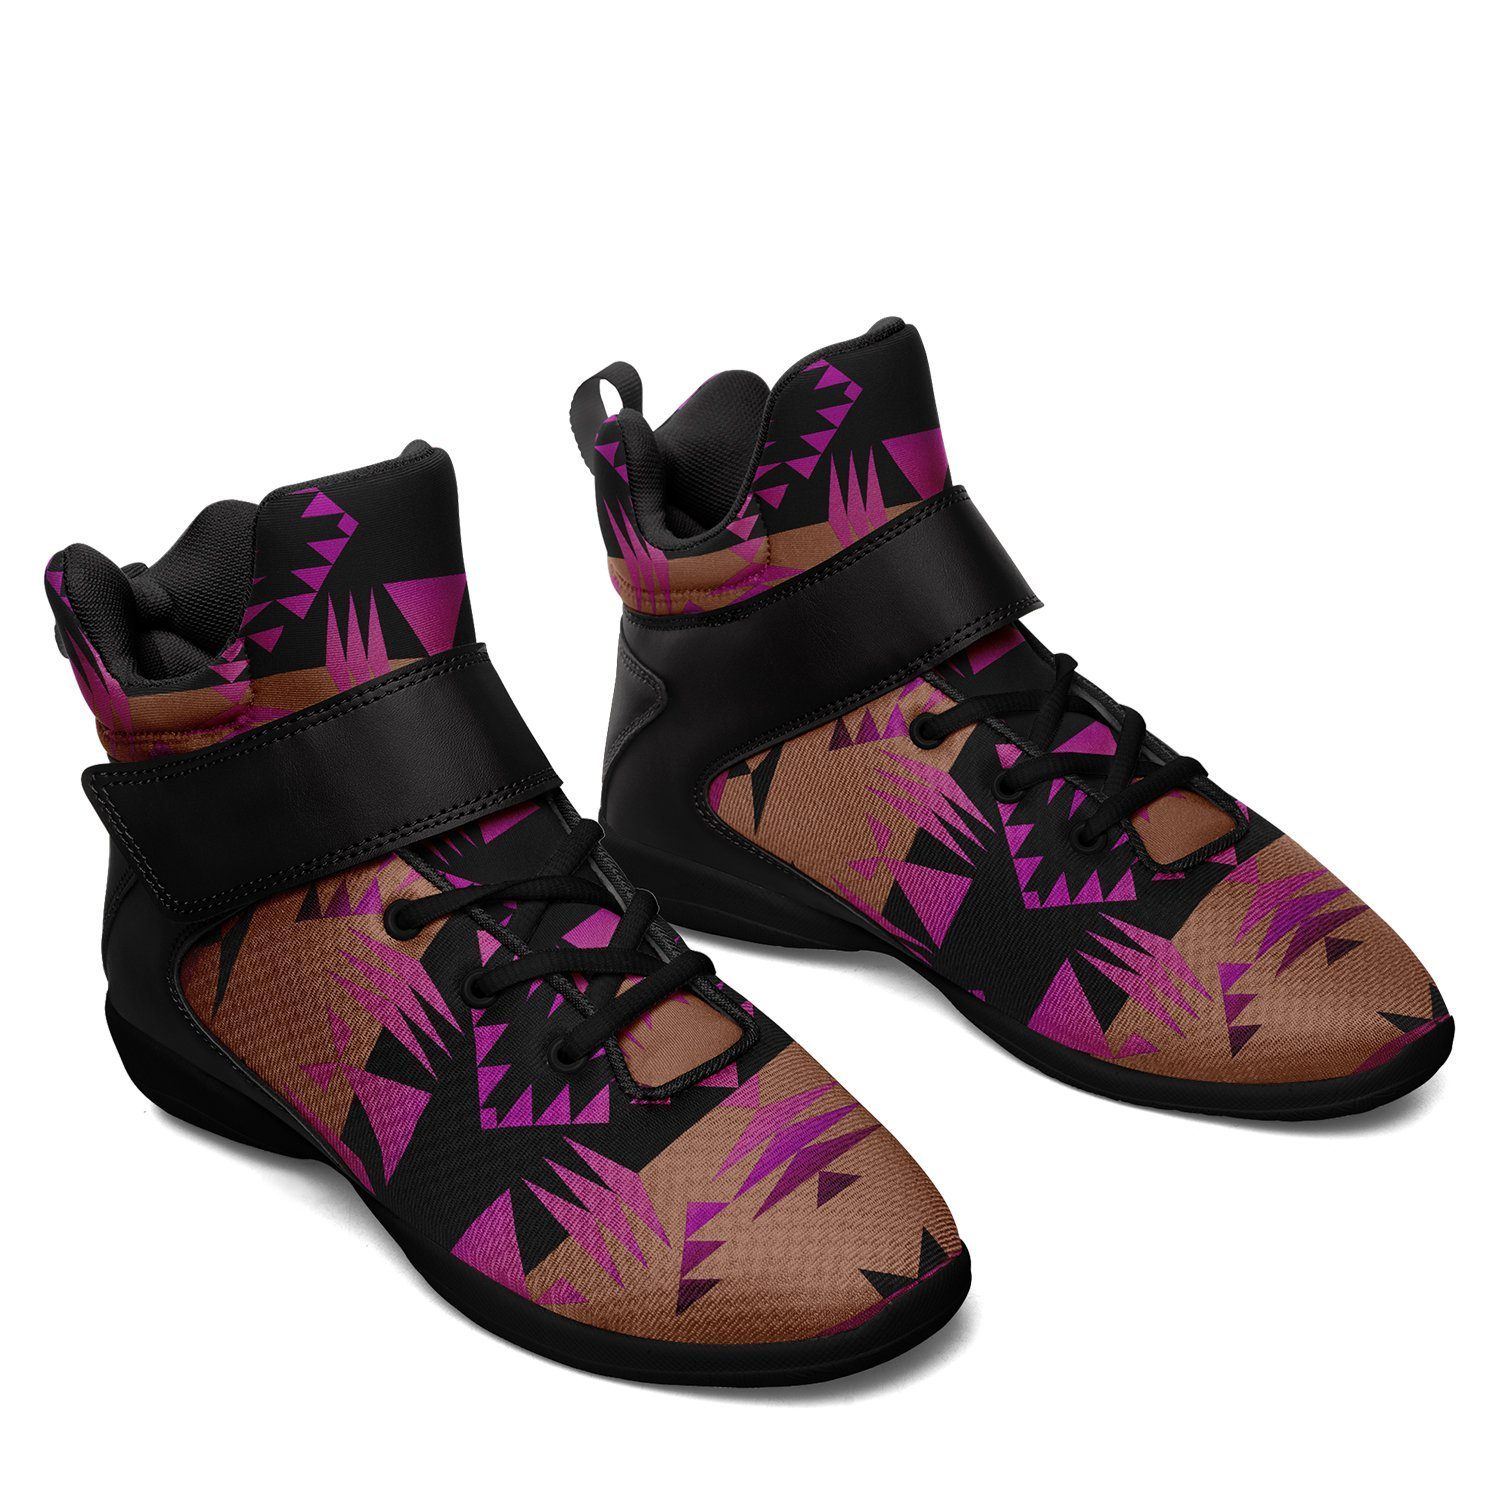 Between the Mountains Berry Ipottaa Basketball / Sport High Top Shoes - Black Sole 49 Dzine 